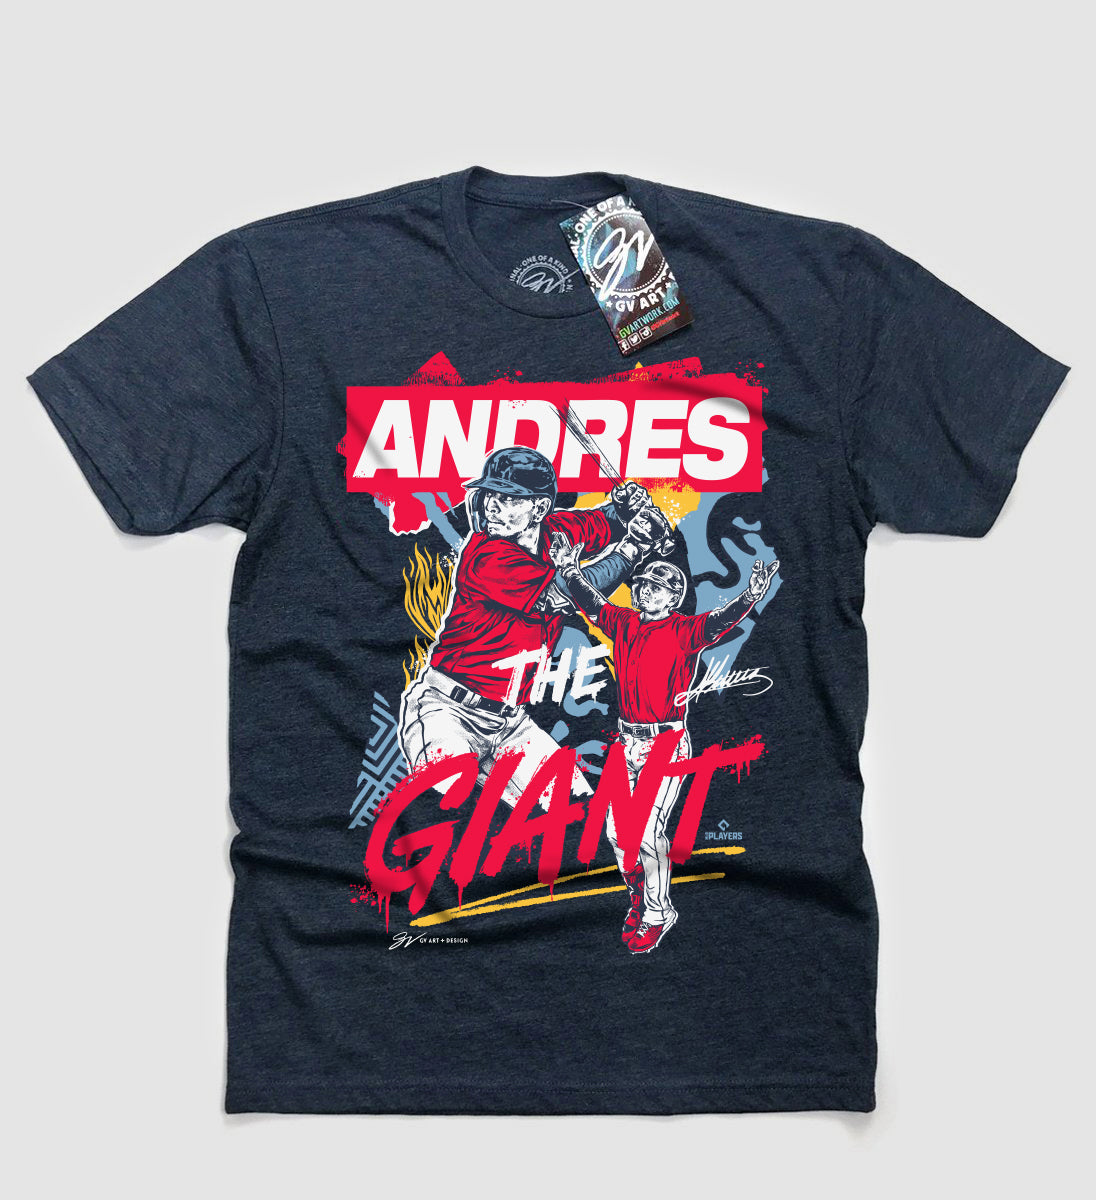 Andres Gimenez "Andres The Giant" T shirt